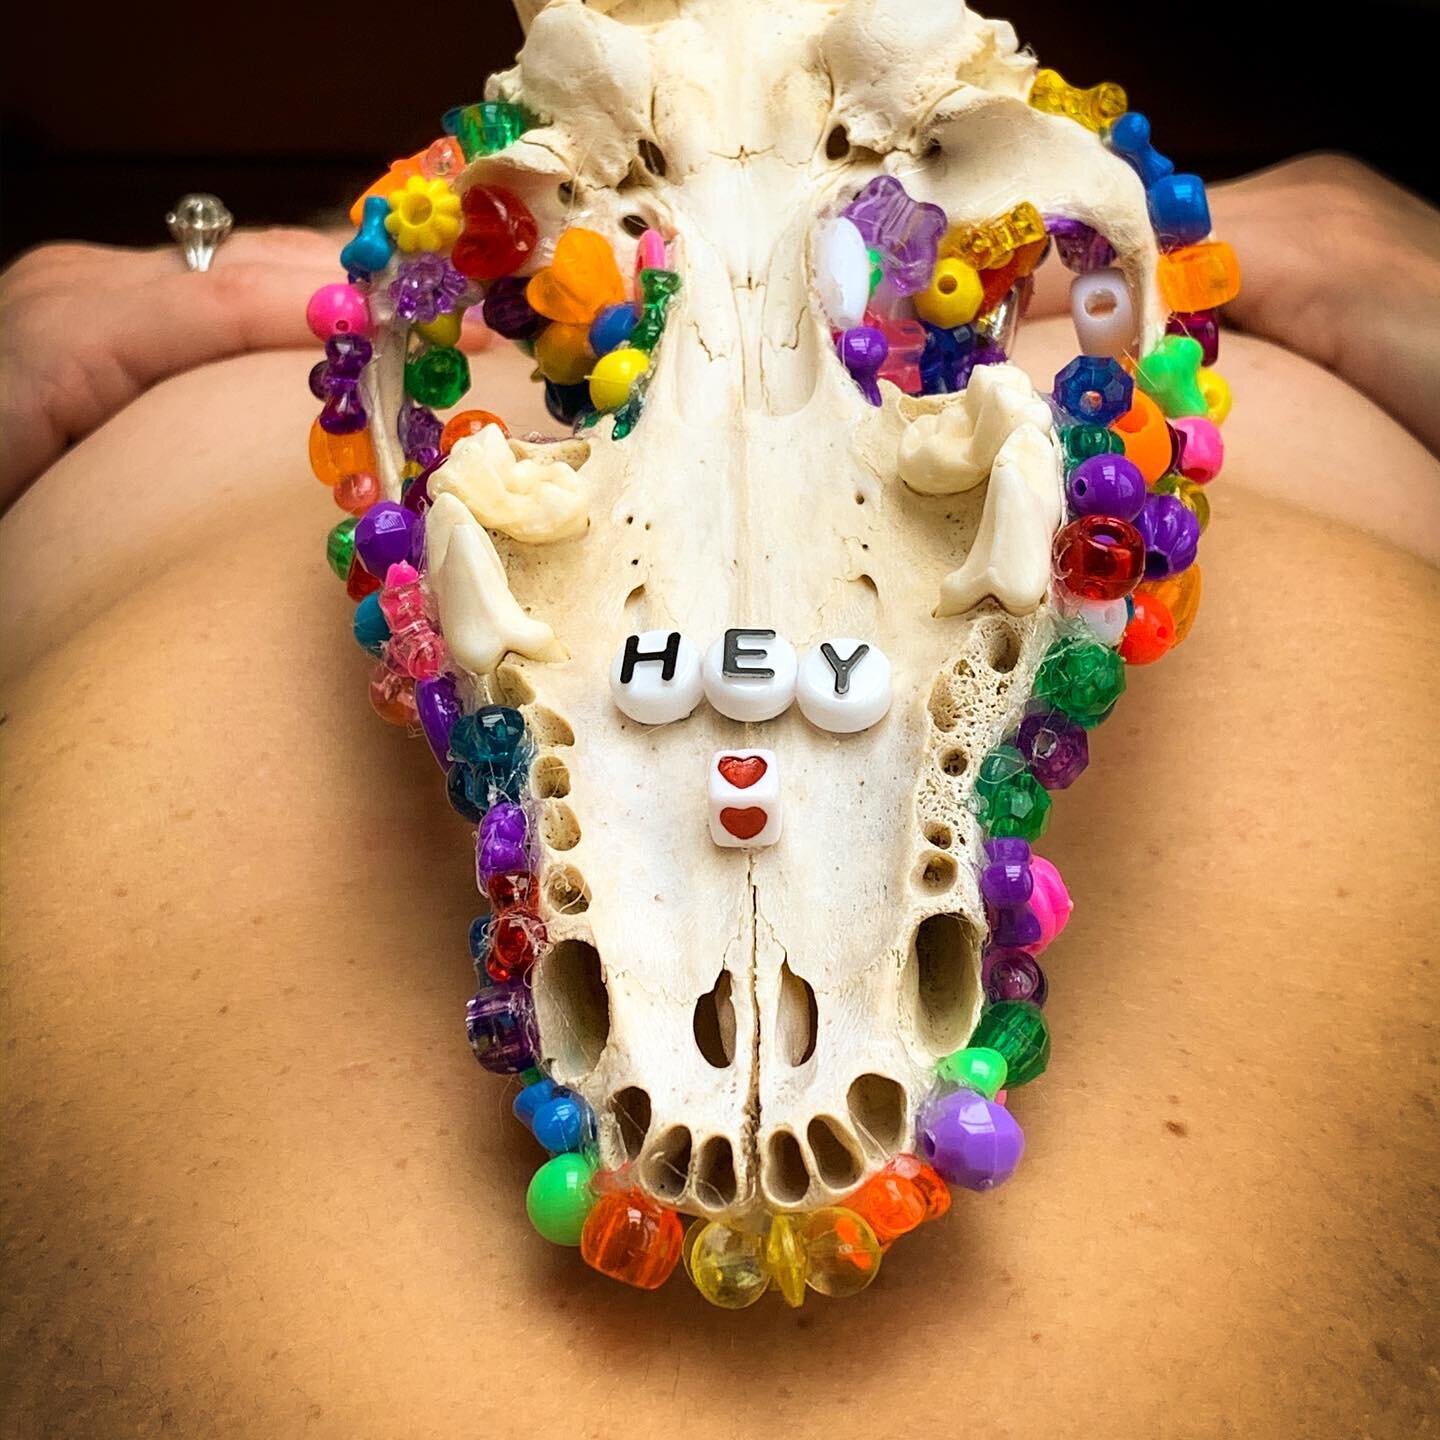 And we continue with our home isolation series of children&rsquo;s arts and crafts. A coyote skull tastefully(?) decorated by my daughter and tastefully(?) photographed on my wife&rsquo;s beautiful belly.